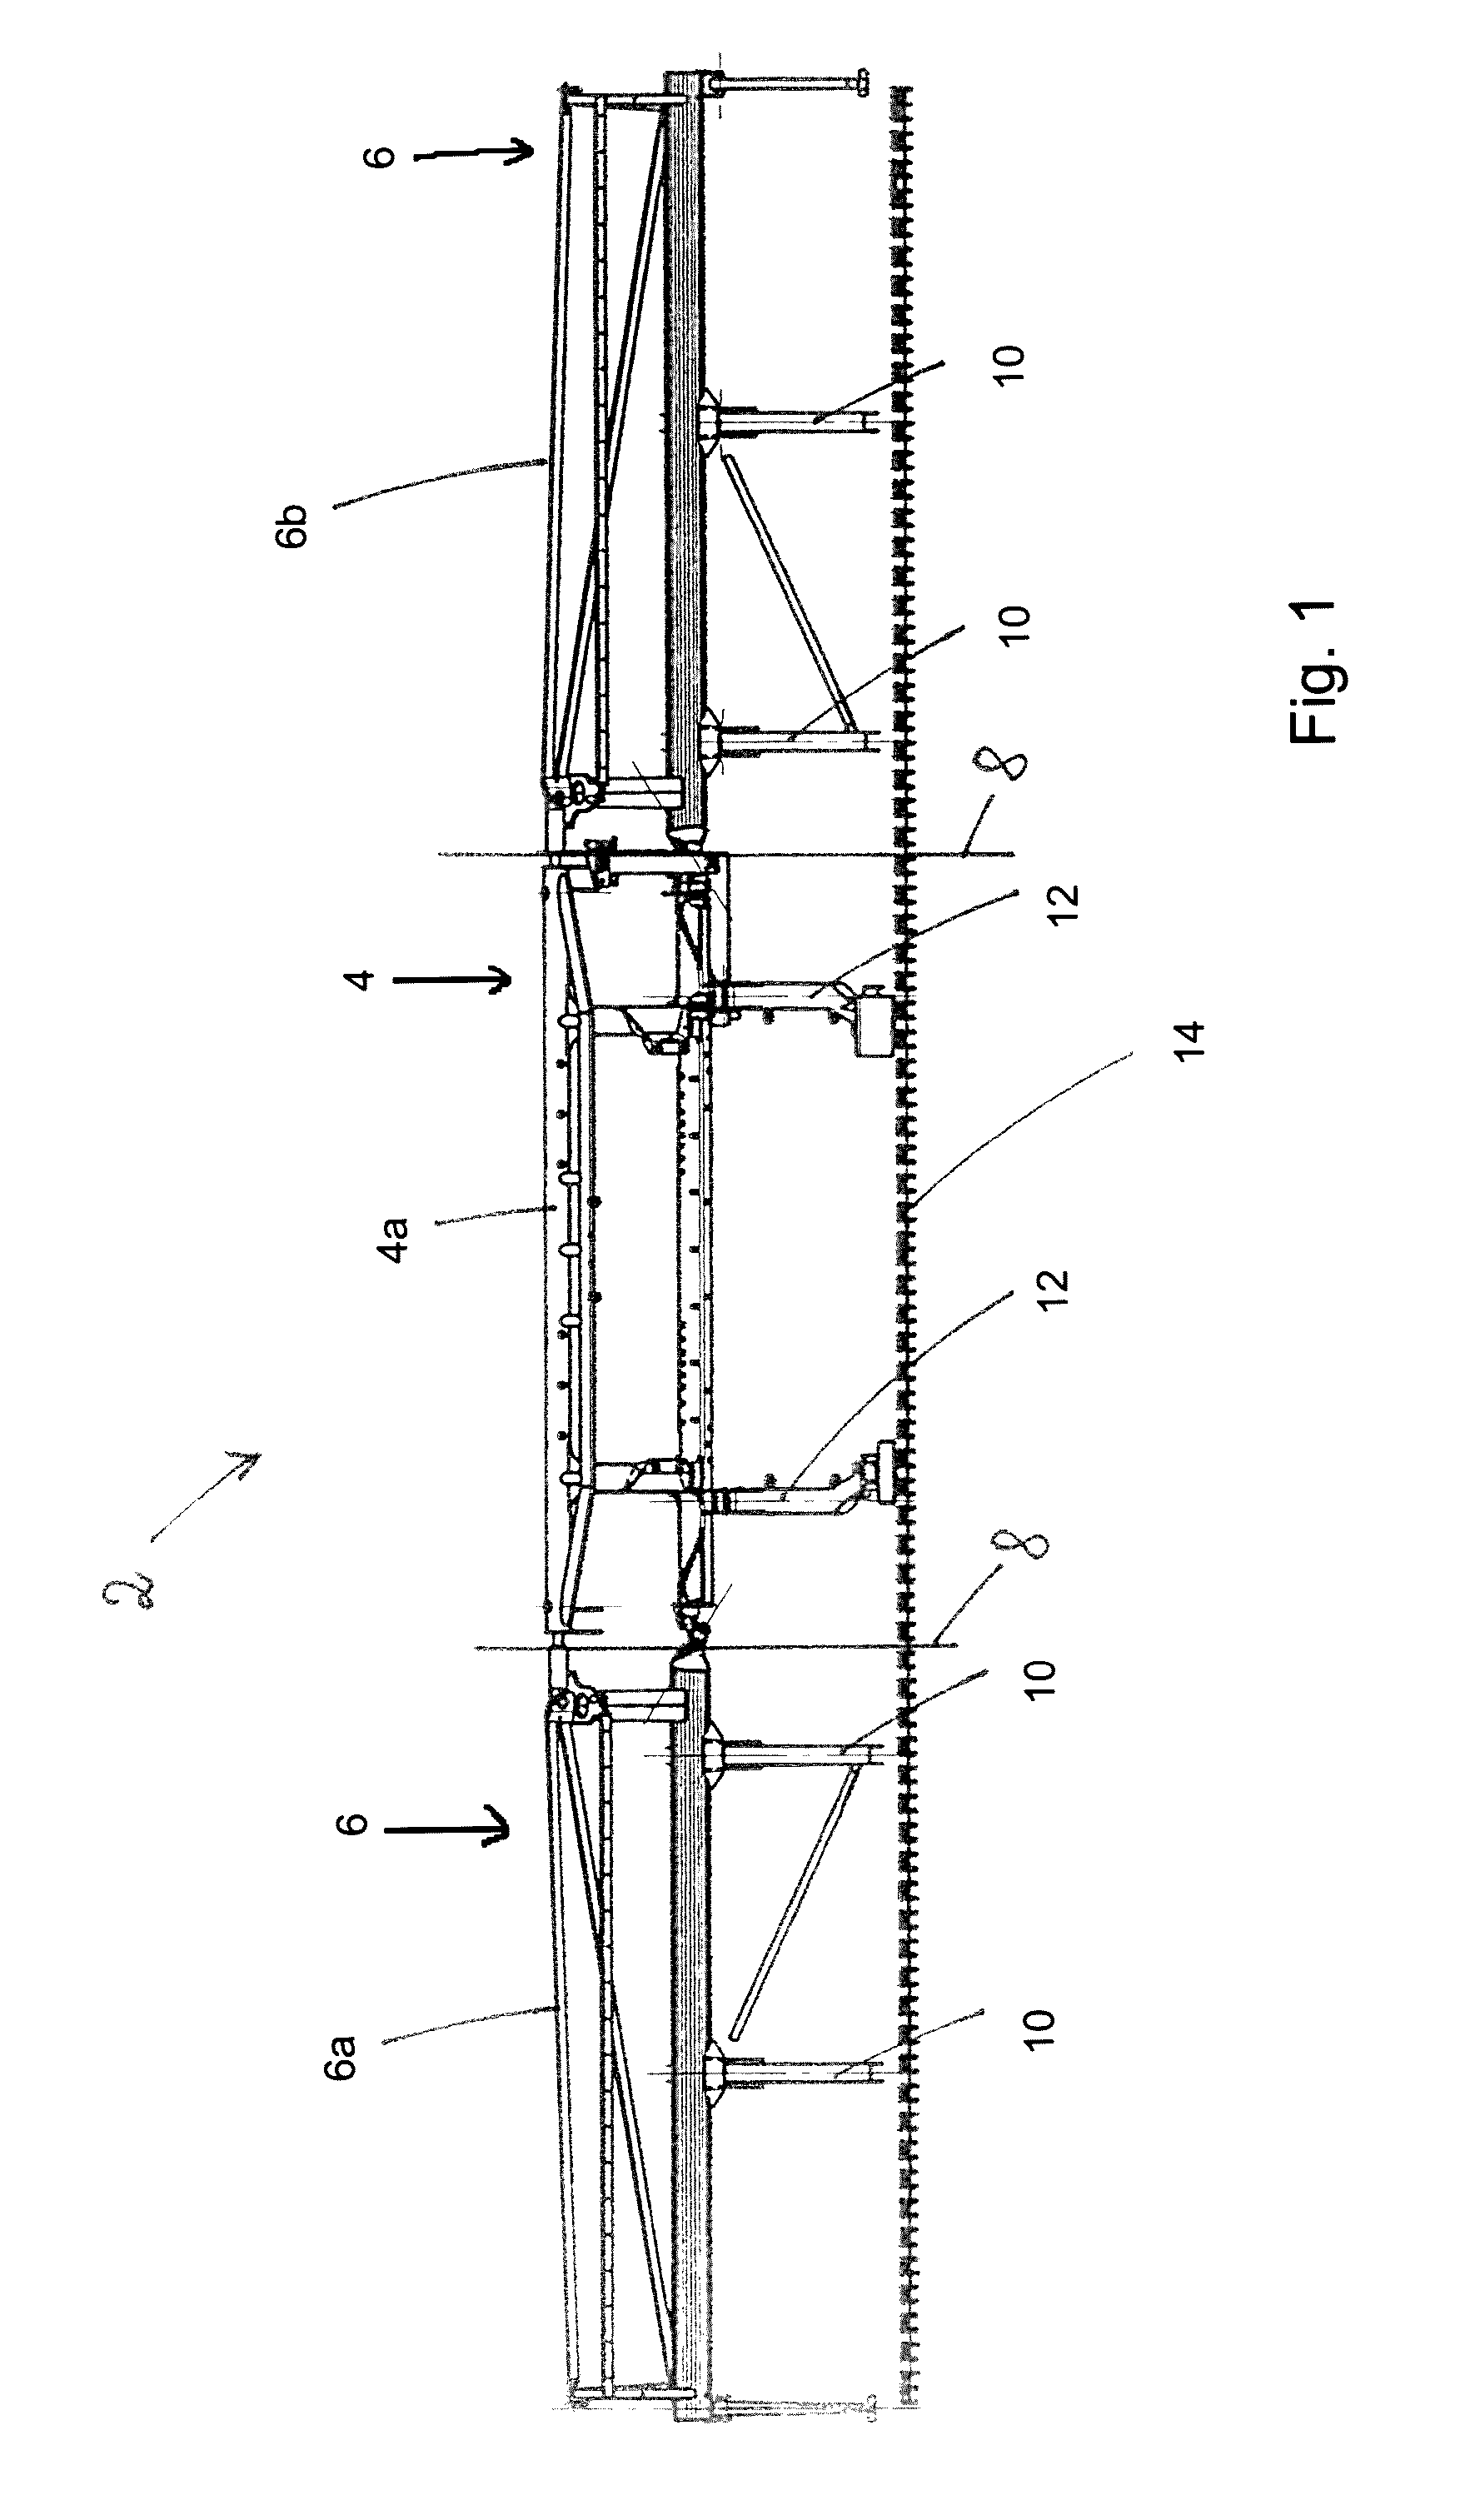 Draper platform with center section and lateral sections arranged laterally to the center section